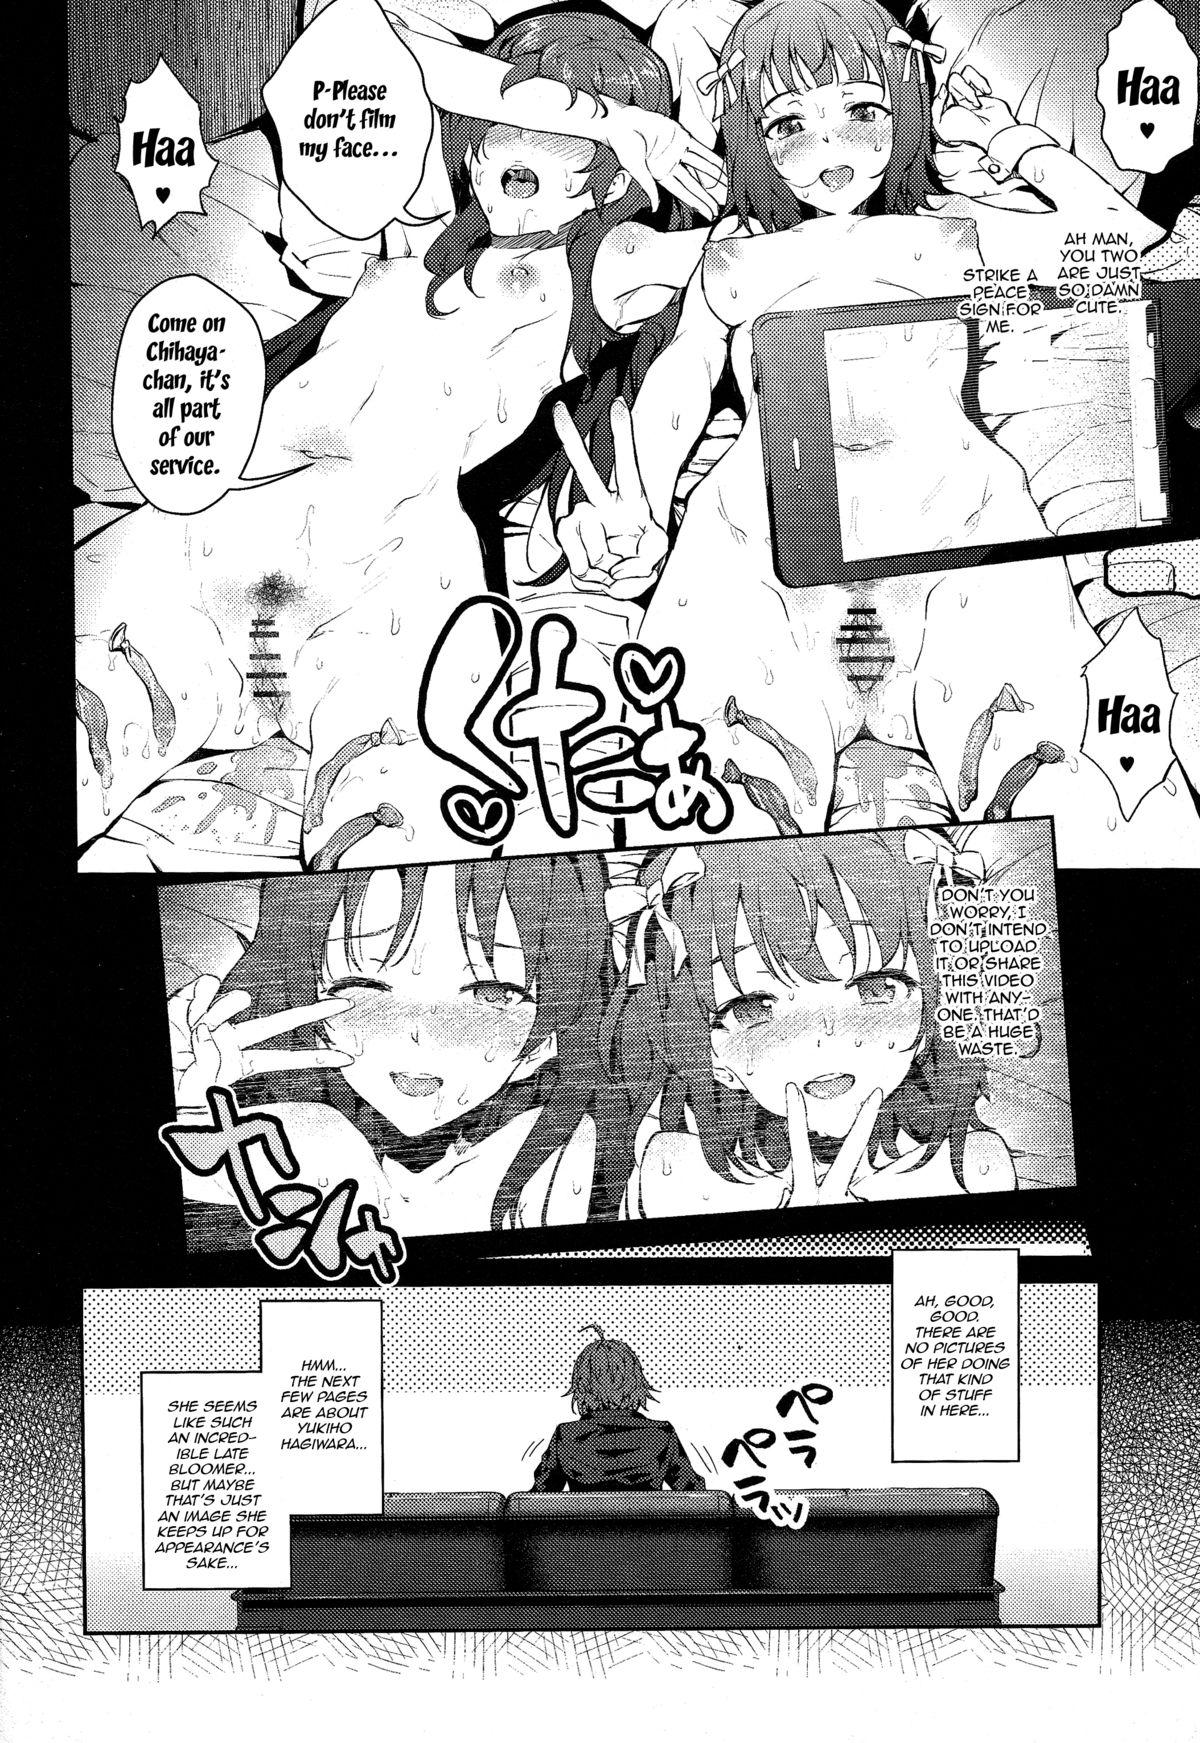 Harcore OMKB - The idolmaster Amatur Porn - Page 8